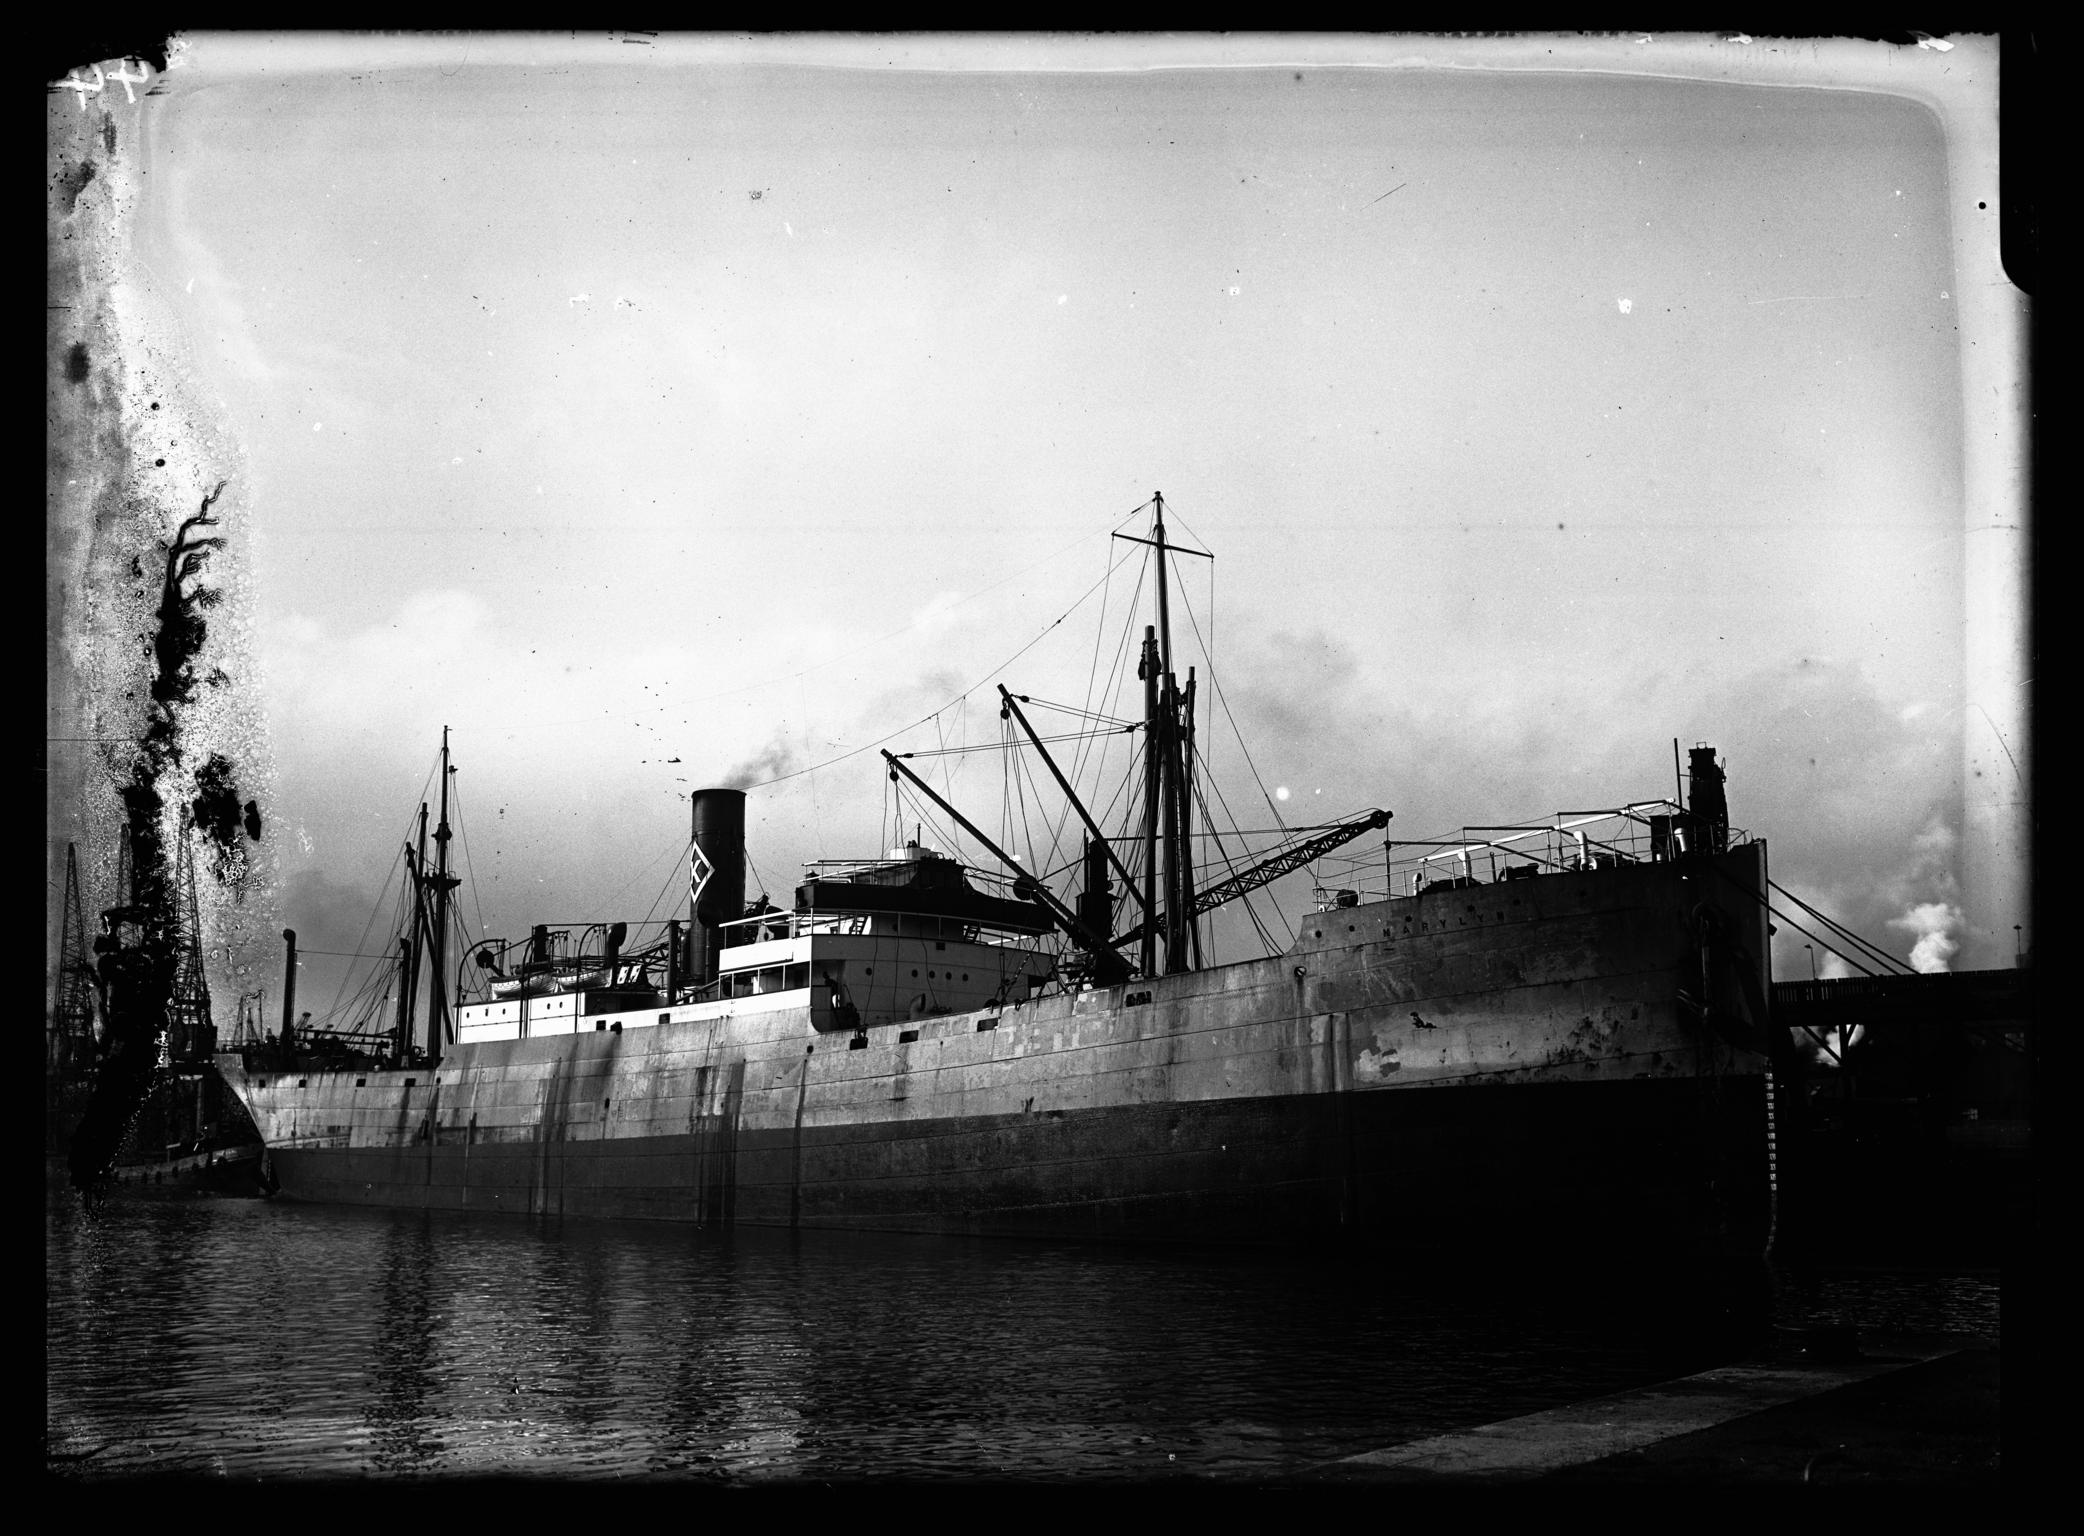 S.S. MARYLYN, glass negative